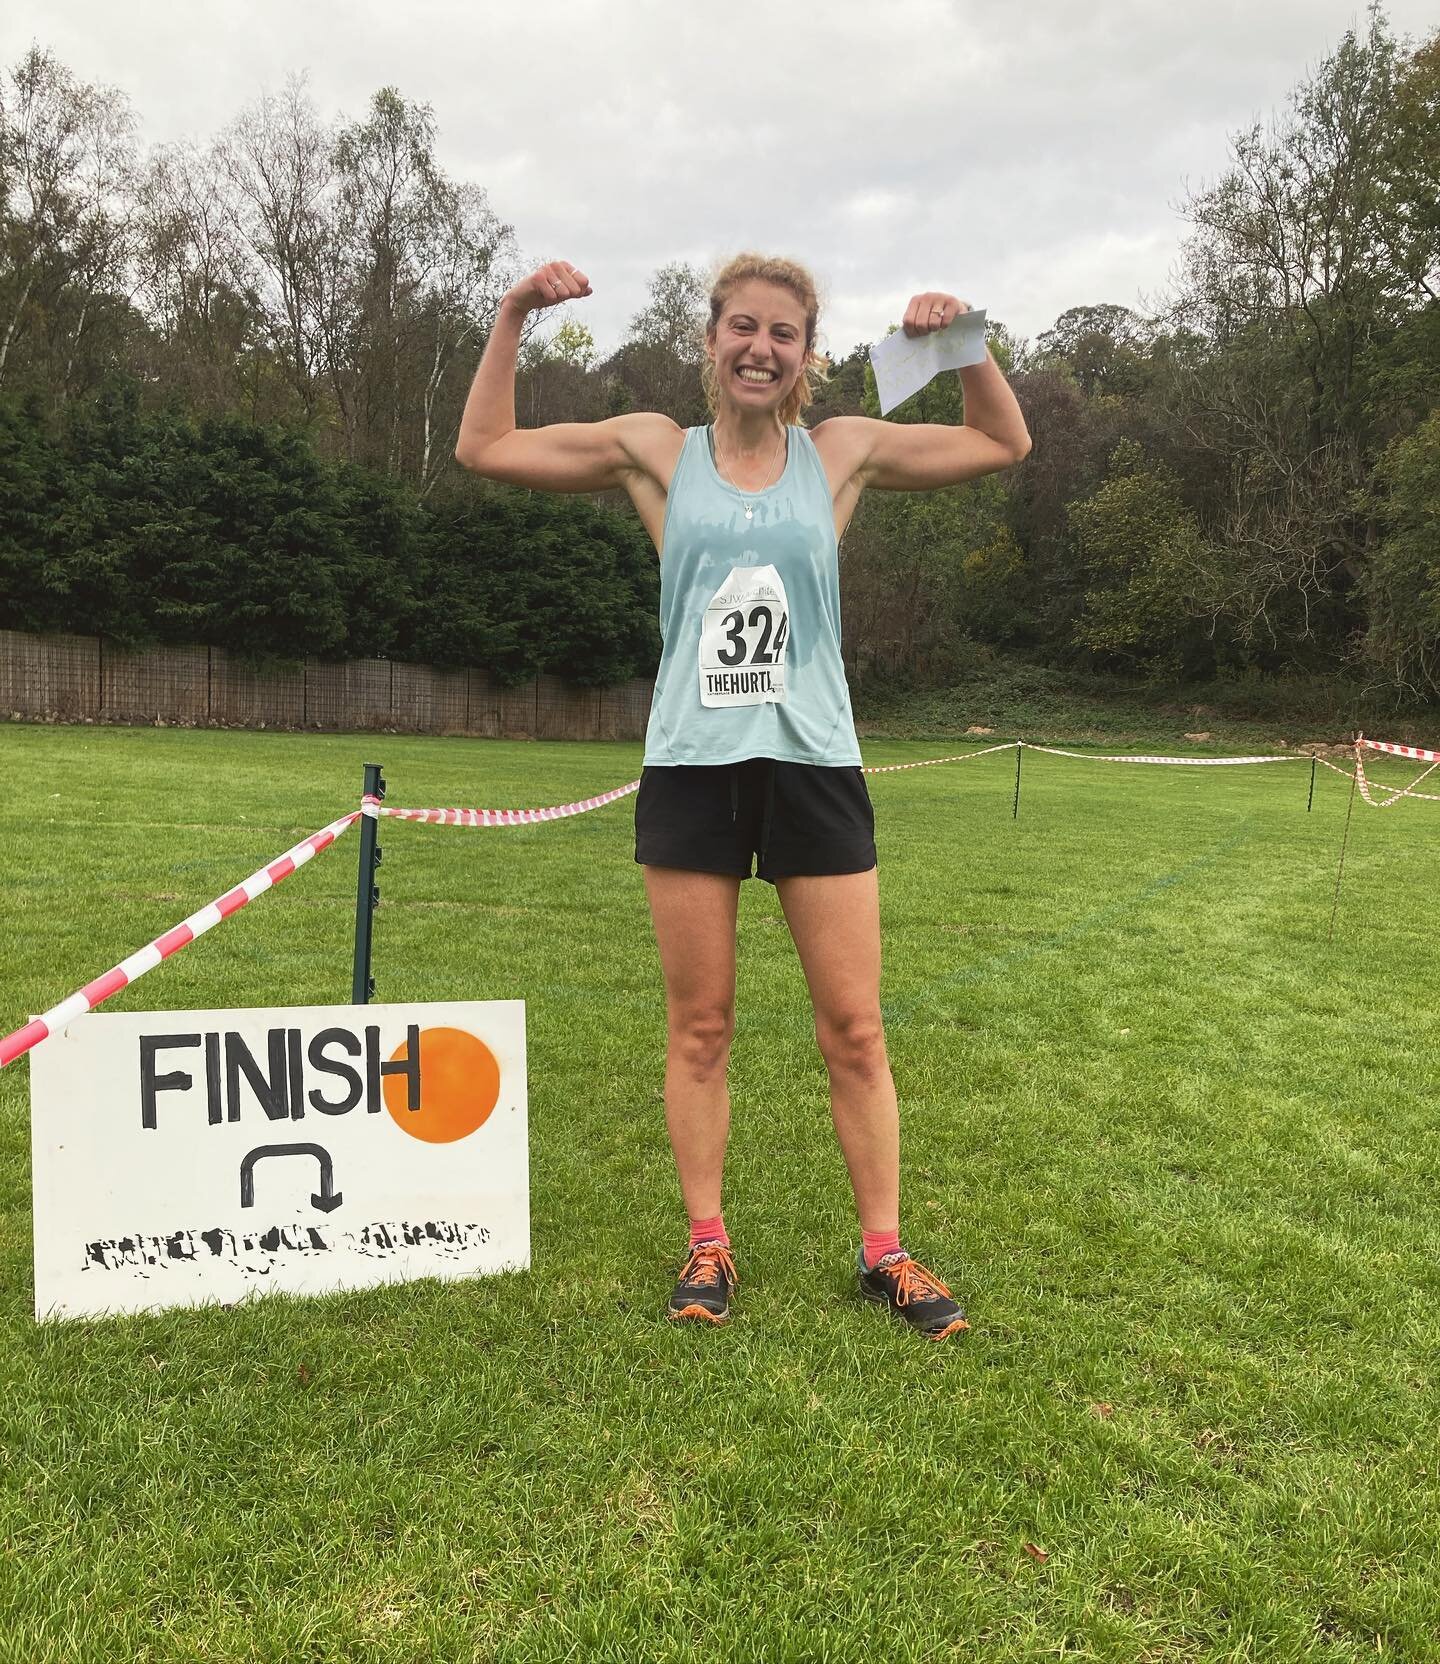 Hathersage Hurtle 20 - loved this race, such a beautiful route through the peaks and the YUMMIEST cake to come back to. Also managed to get 3rd female which was a nice surprise 🏃🏽&zwj;♀️